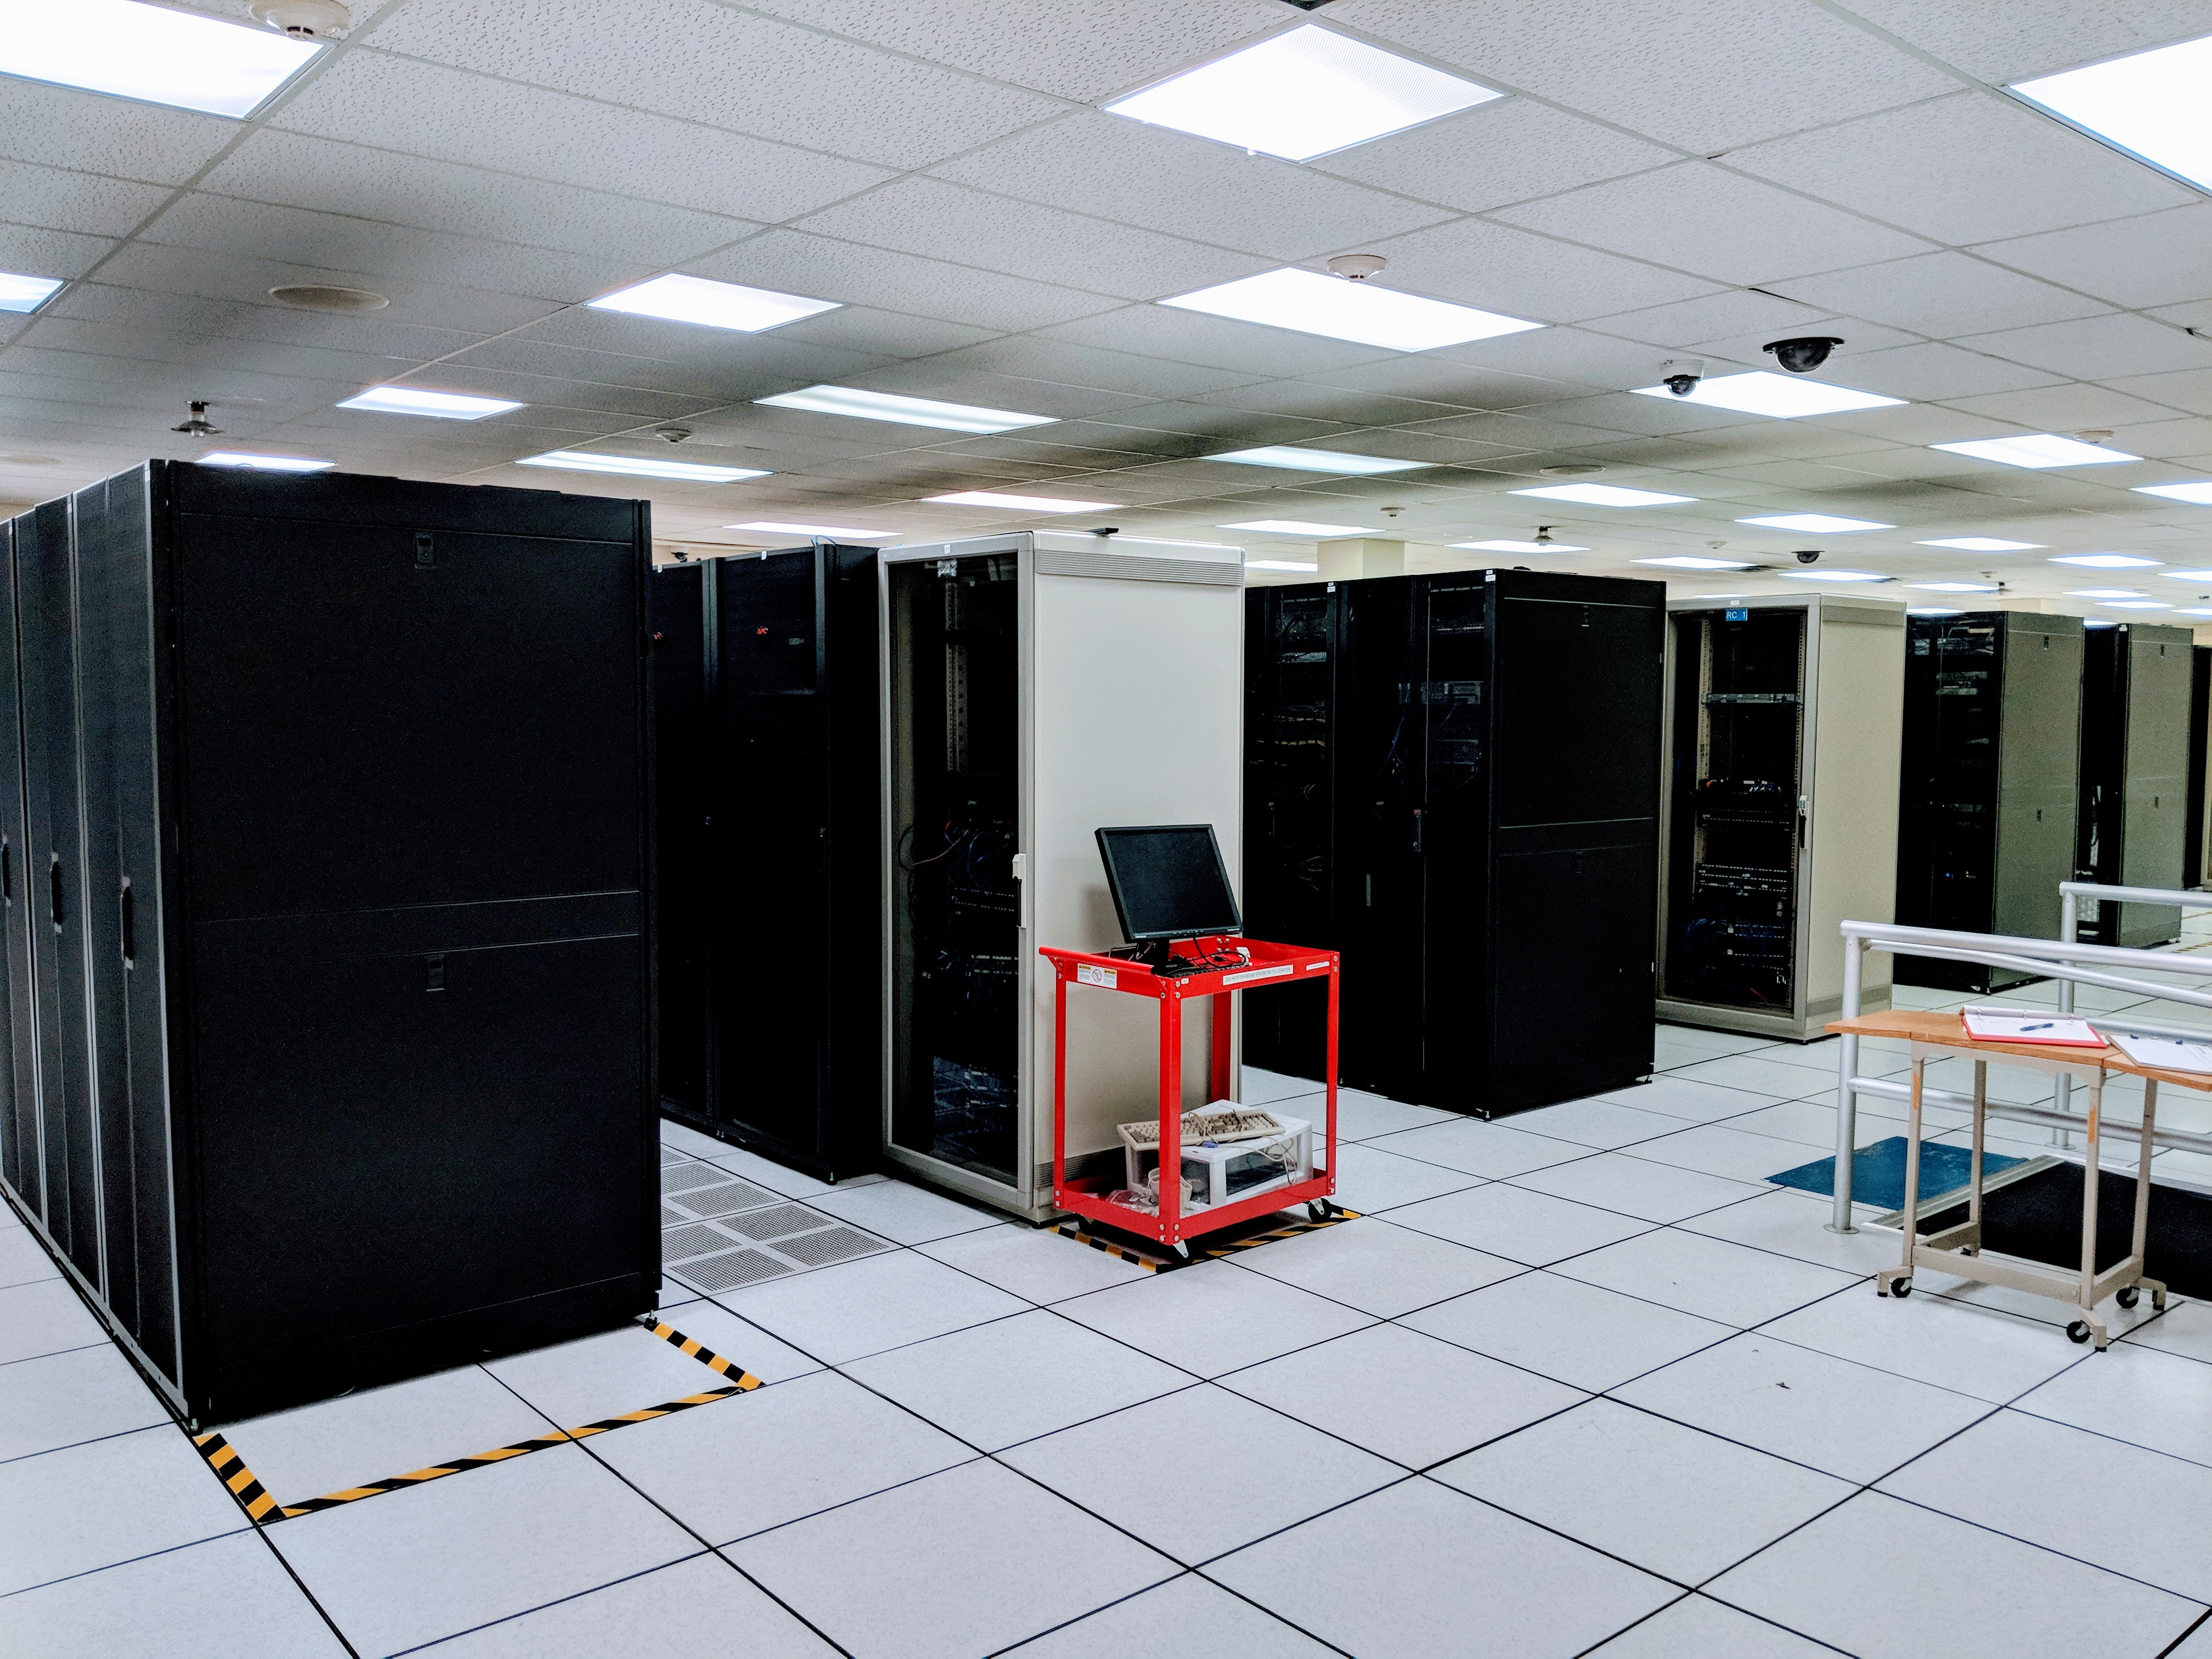 A while room filled with rows of servers.